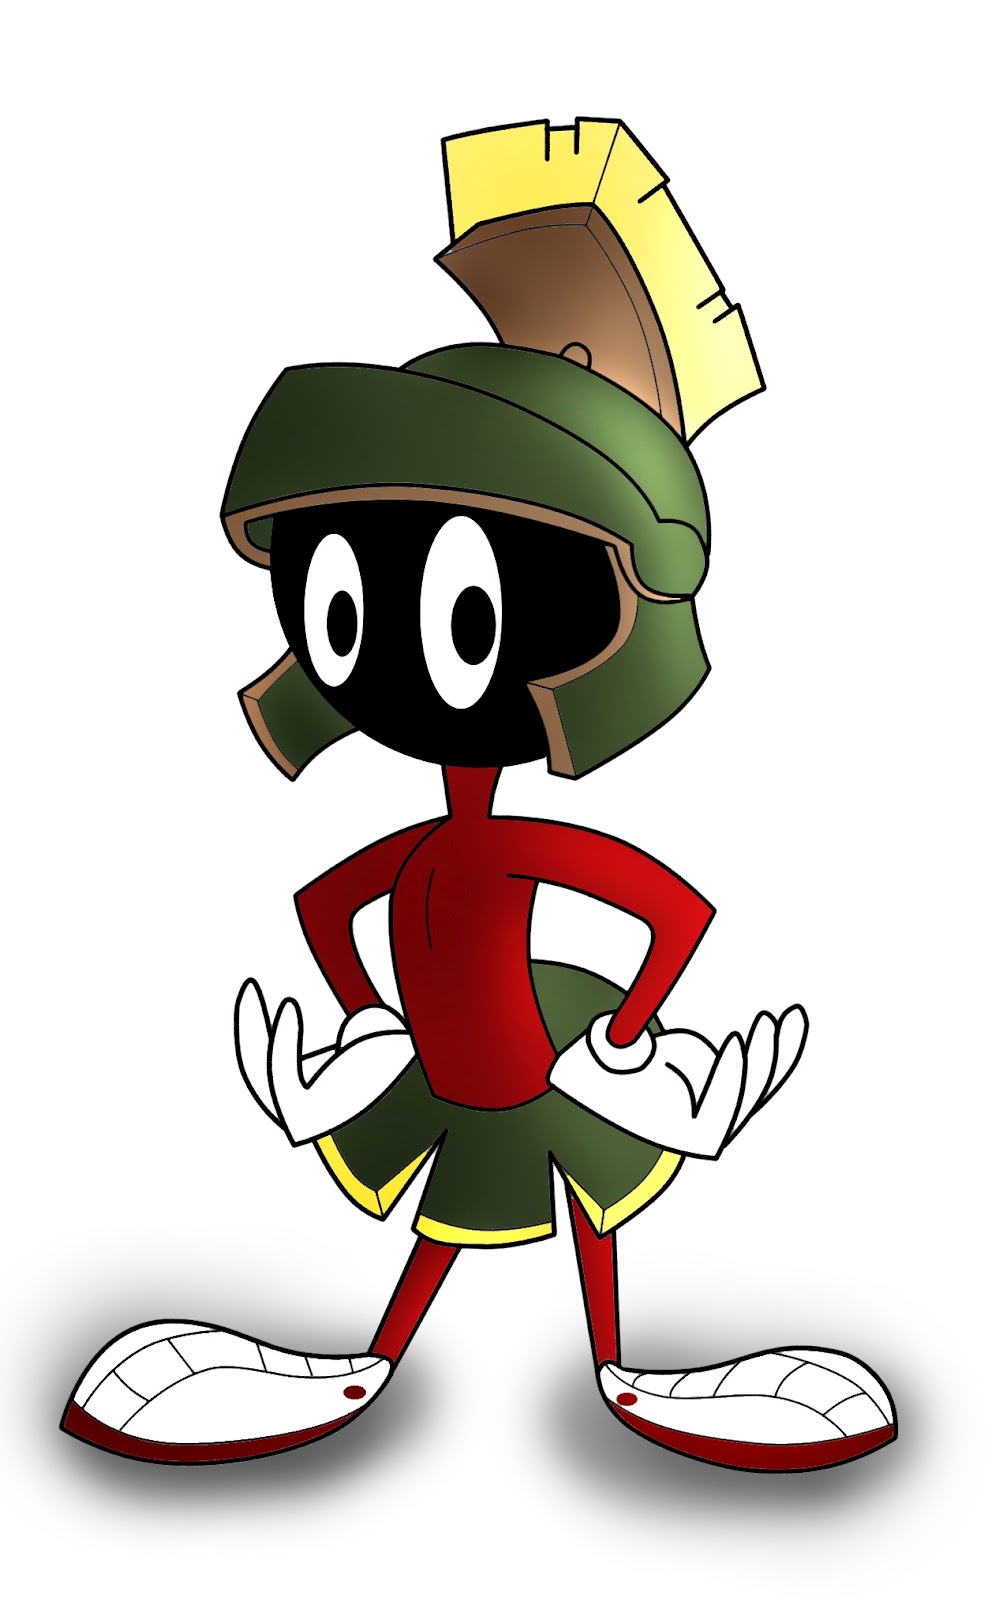 Free Disney Marvin the Martian Charatcers Wallpaper